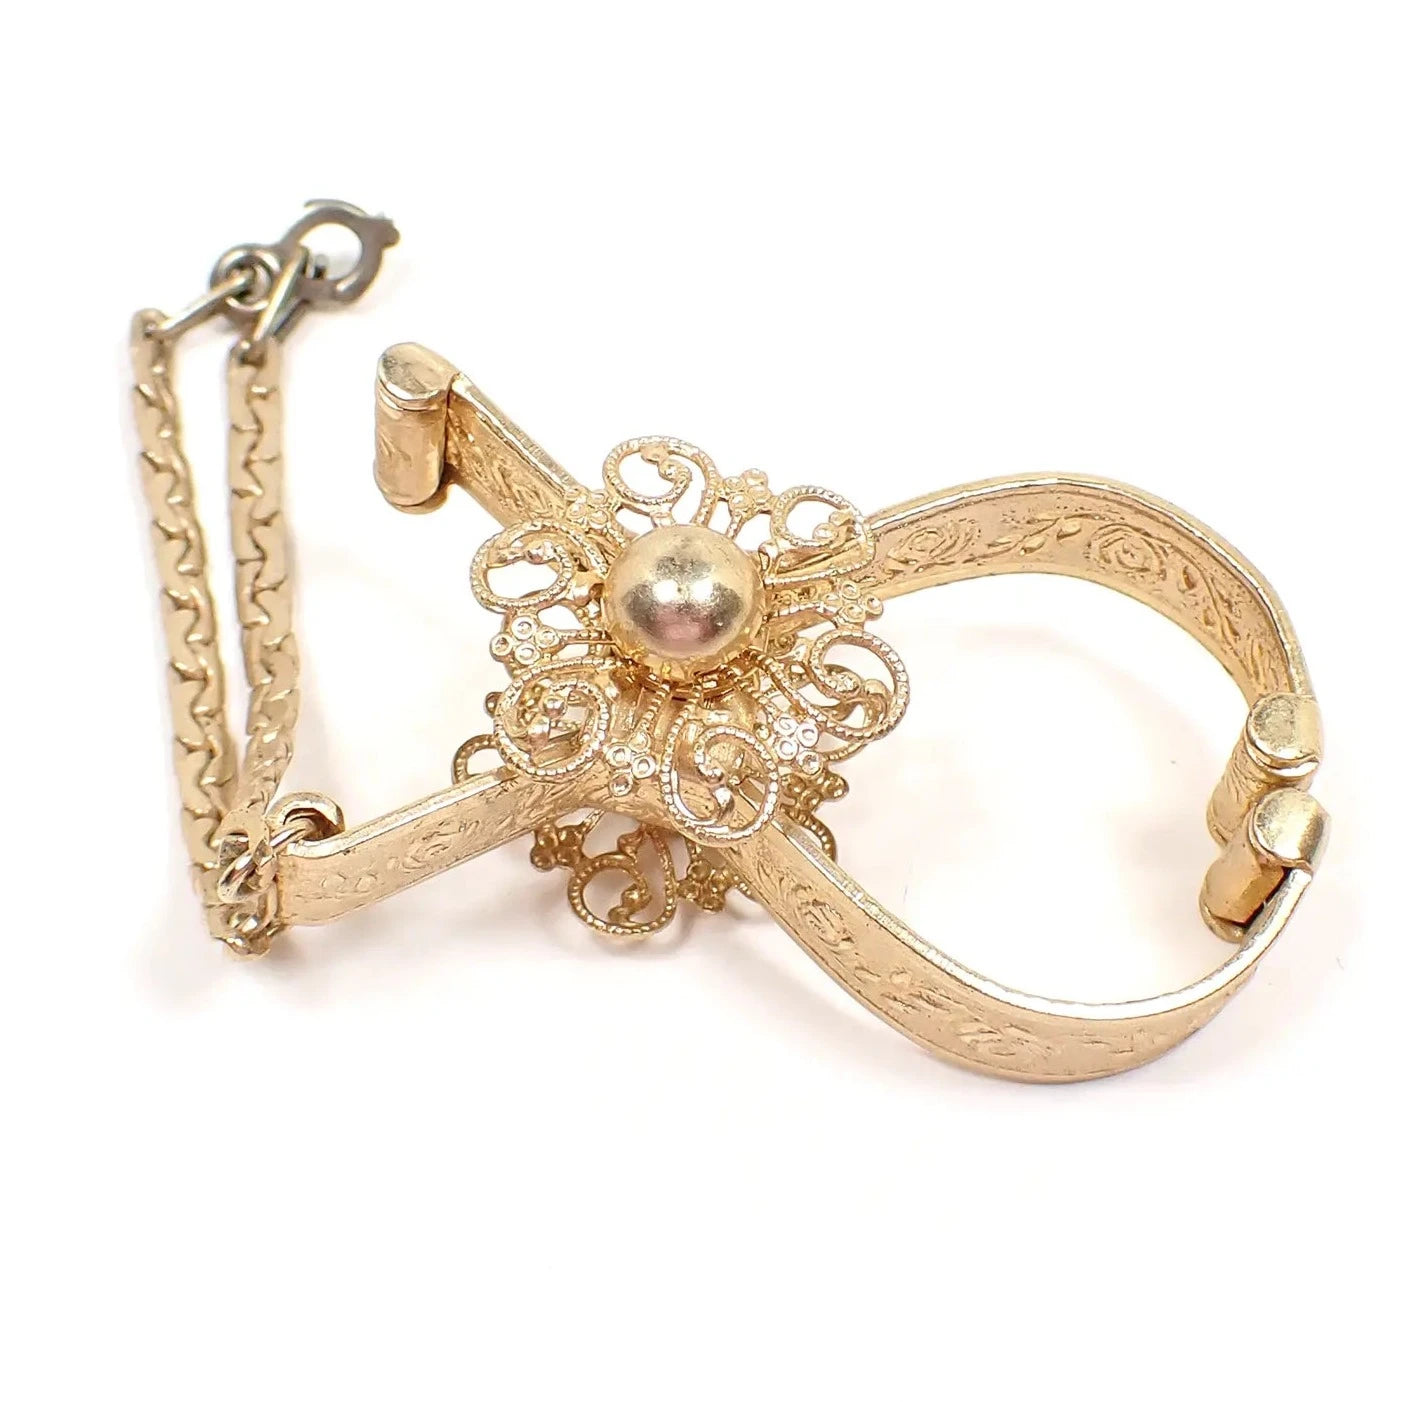 Side view of the Mid Century vintage glove holder clip. The metal is gold tone in color. It has a raised floral design and a filigree flower on each side. There is a short virola link chain at the end with a hinged clip in the middle that is darker than the rest of the piece.